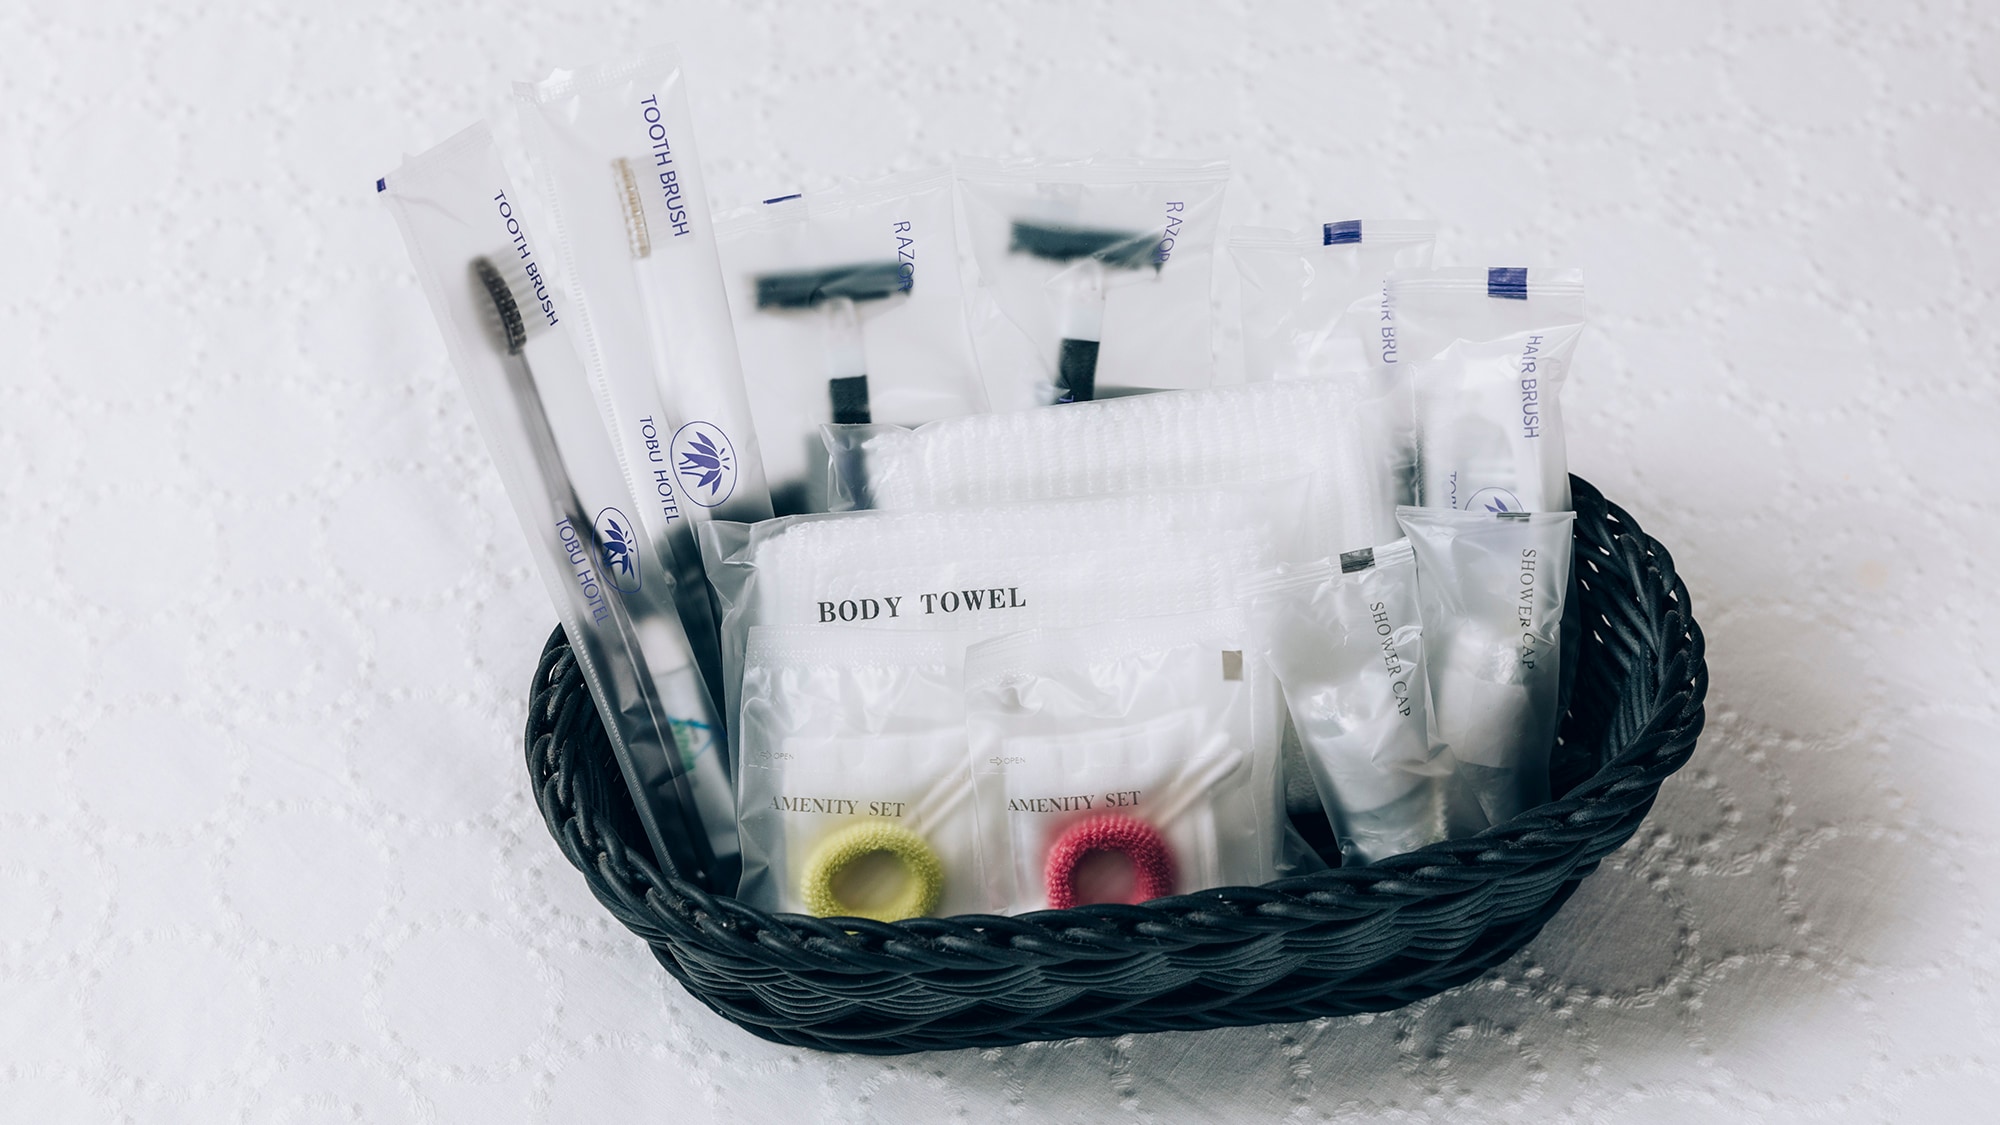 Amenity goods such as toothbrushes and body towels are available in each room.